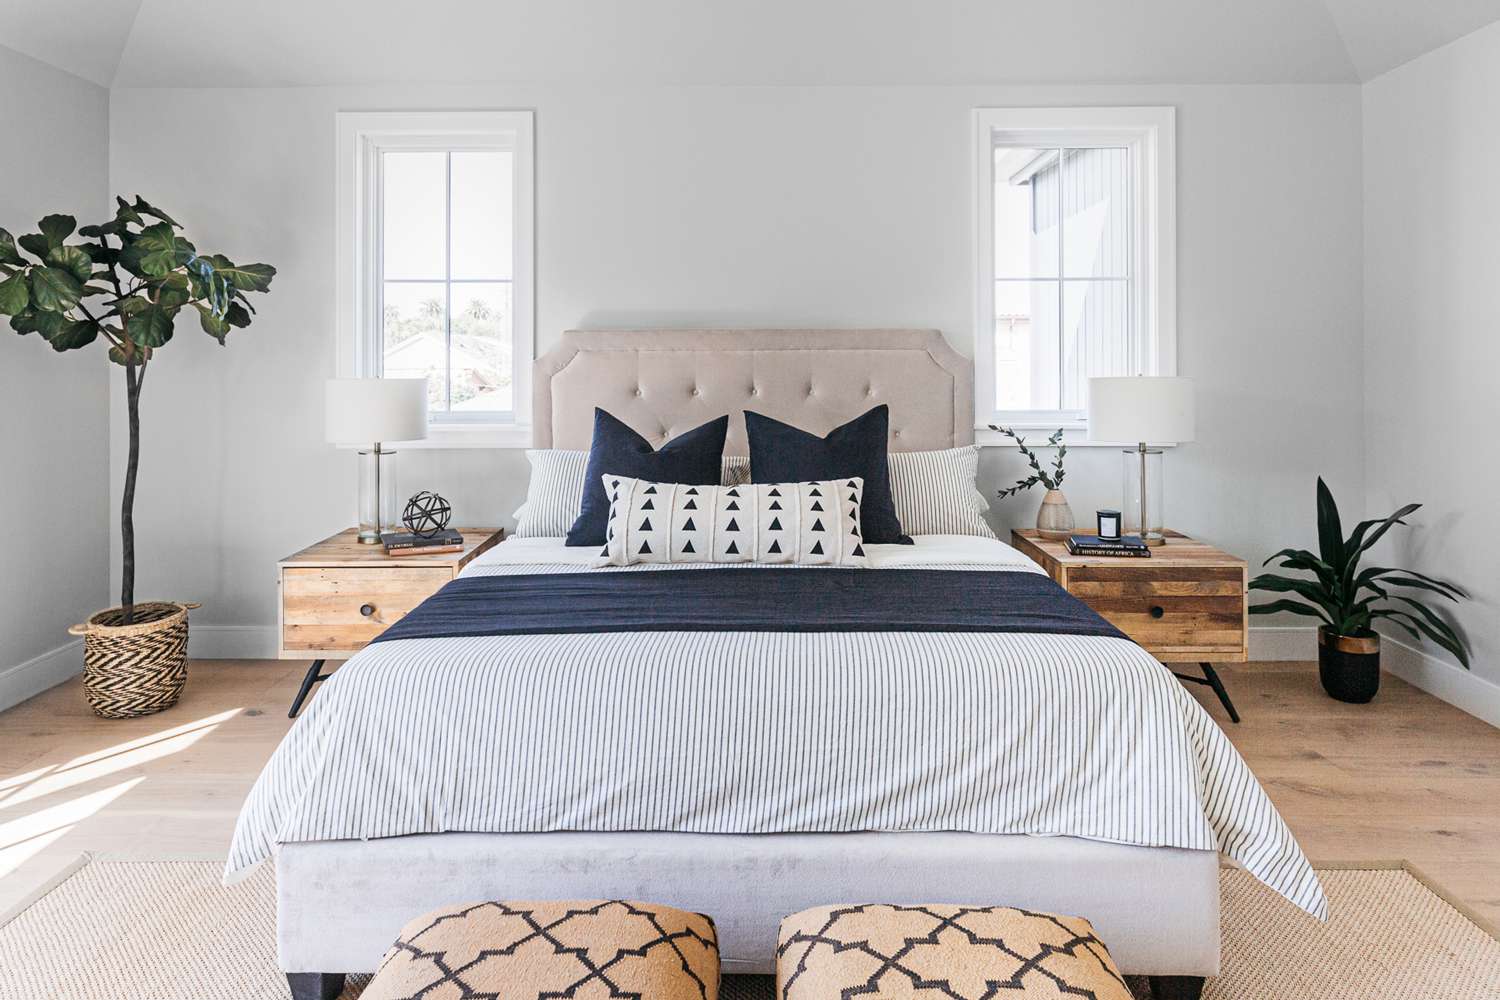 3 Ways To Make Your Bed Look Like A Million Bucks